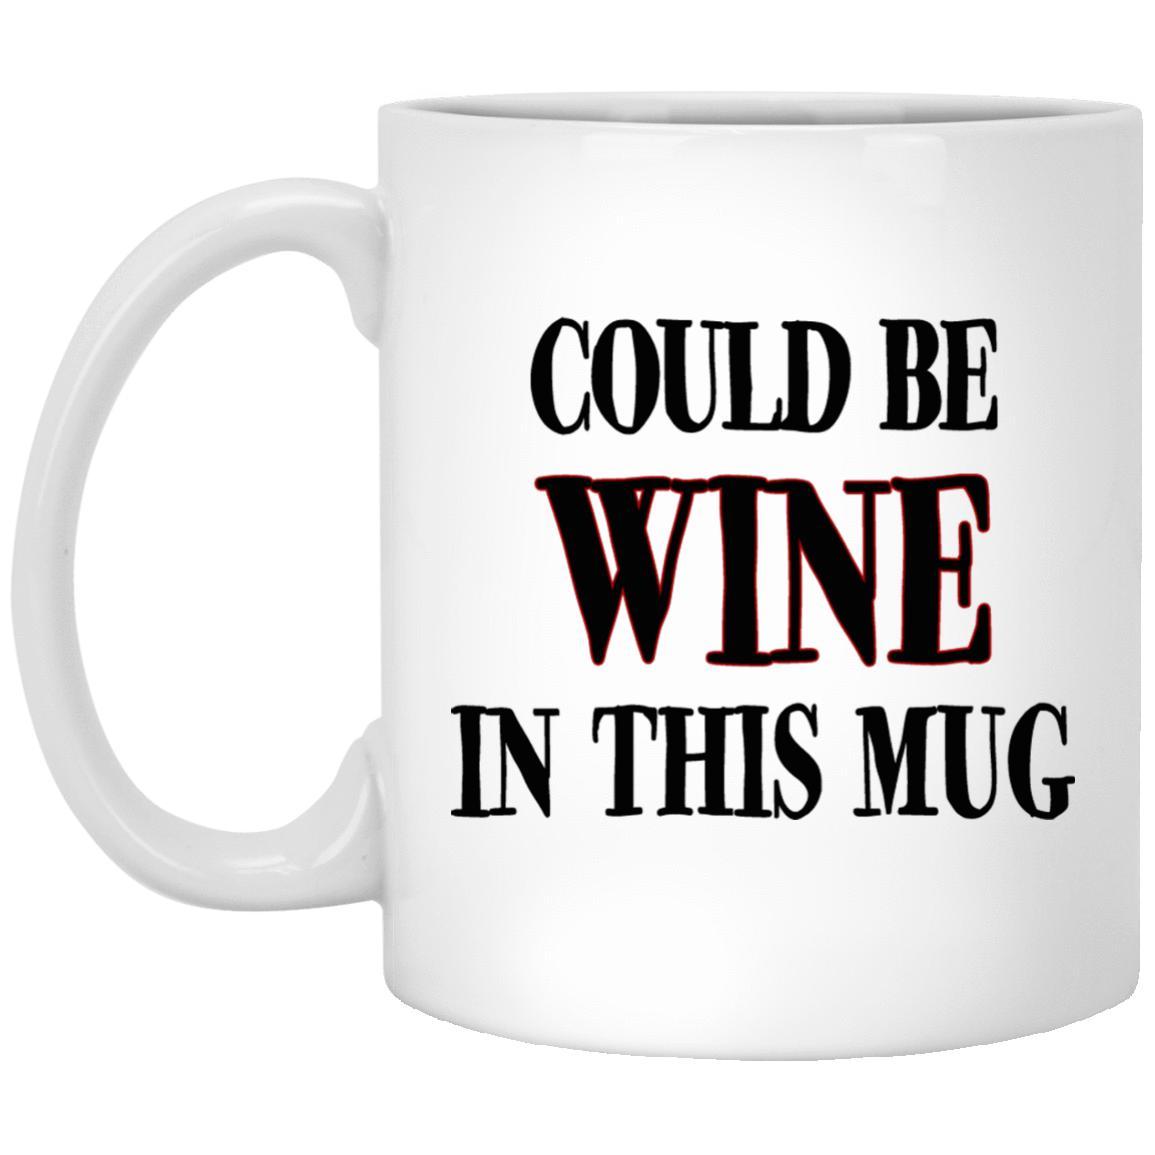 Could Be Wine Mugs - Great gift for the wine lover